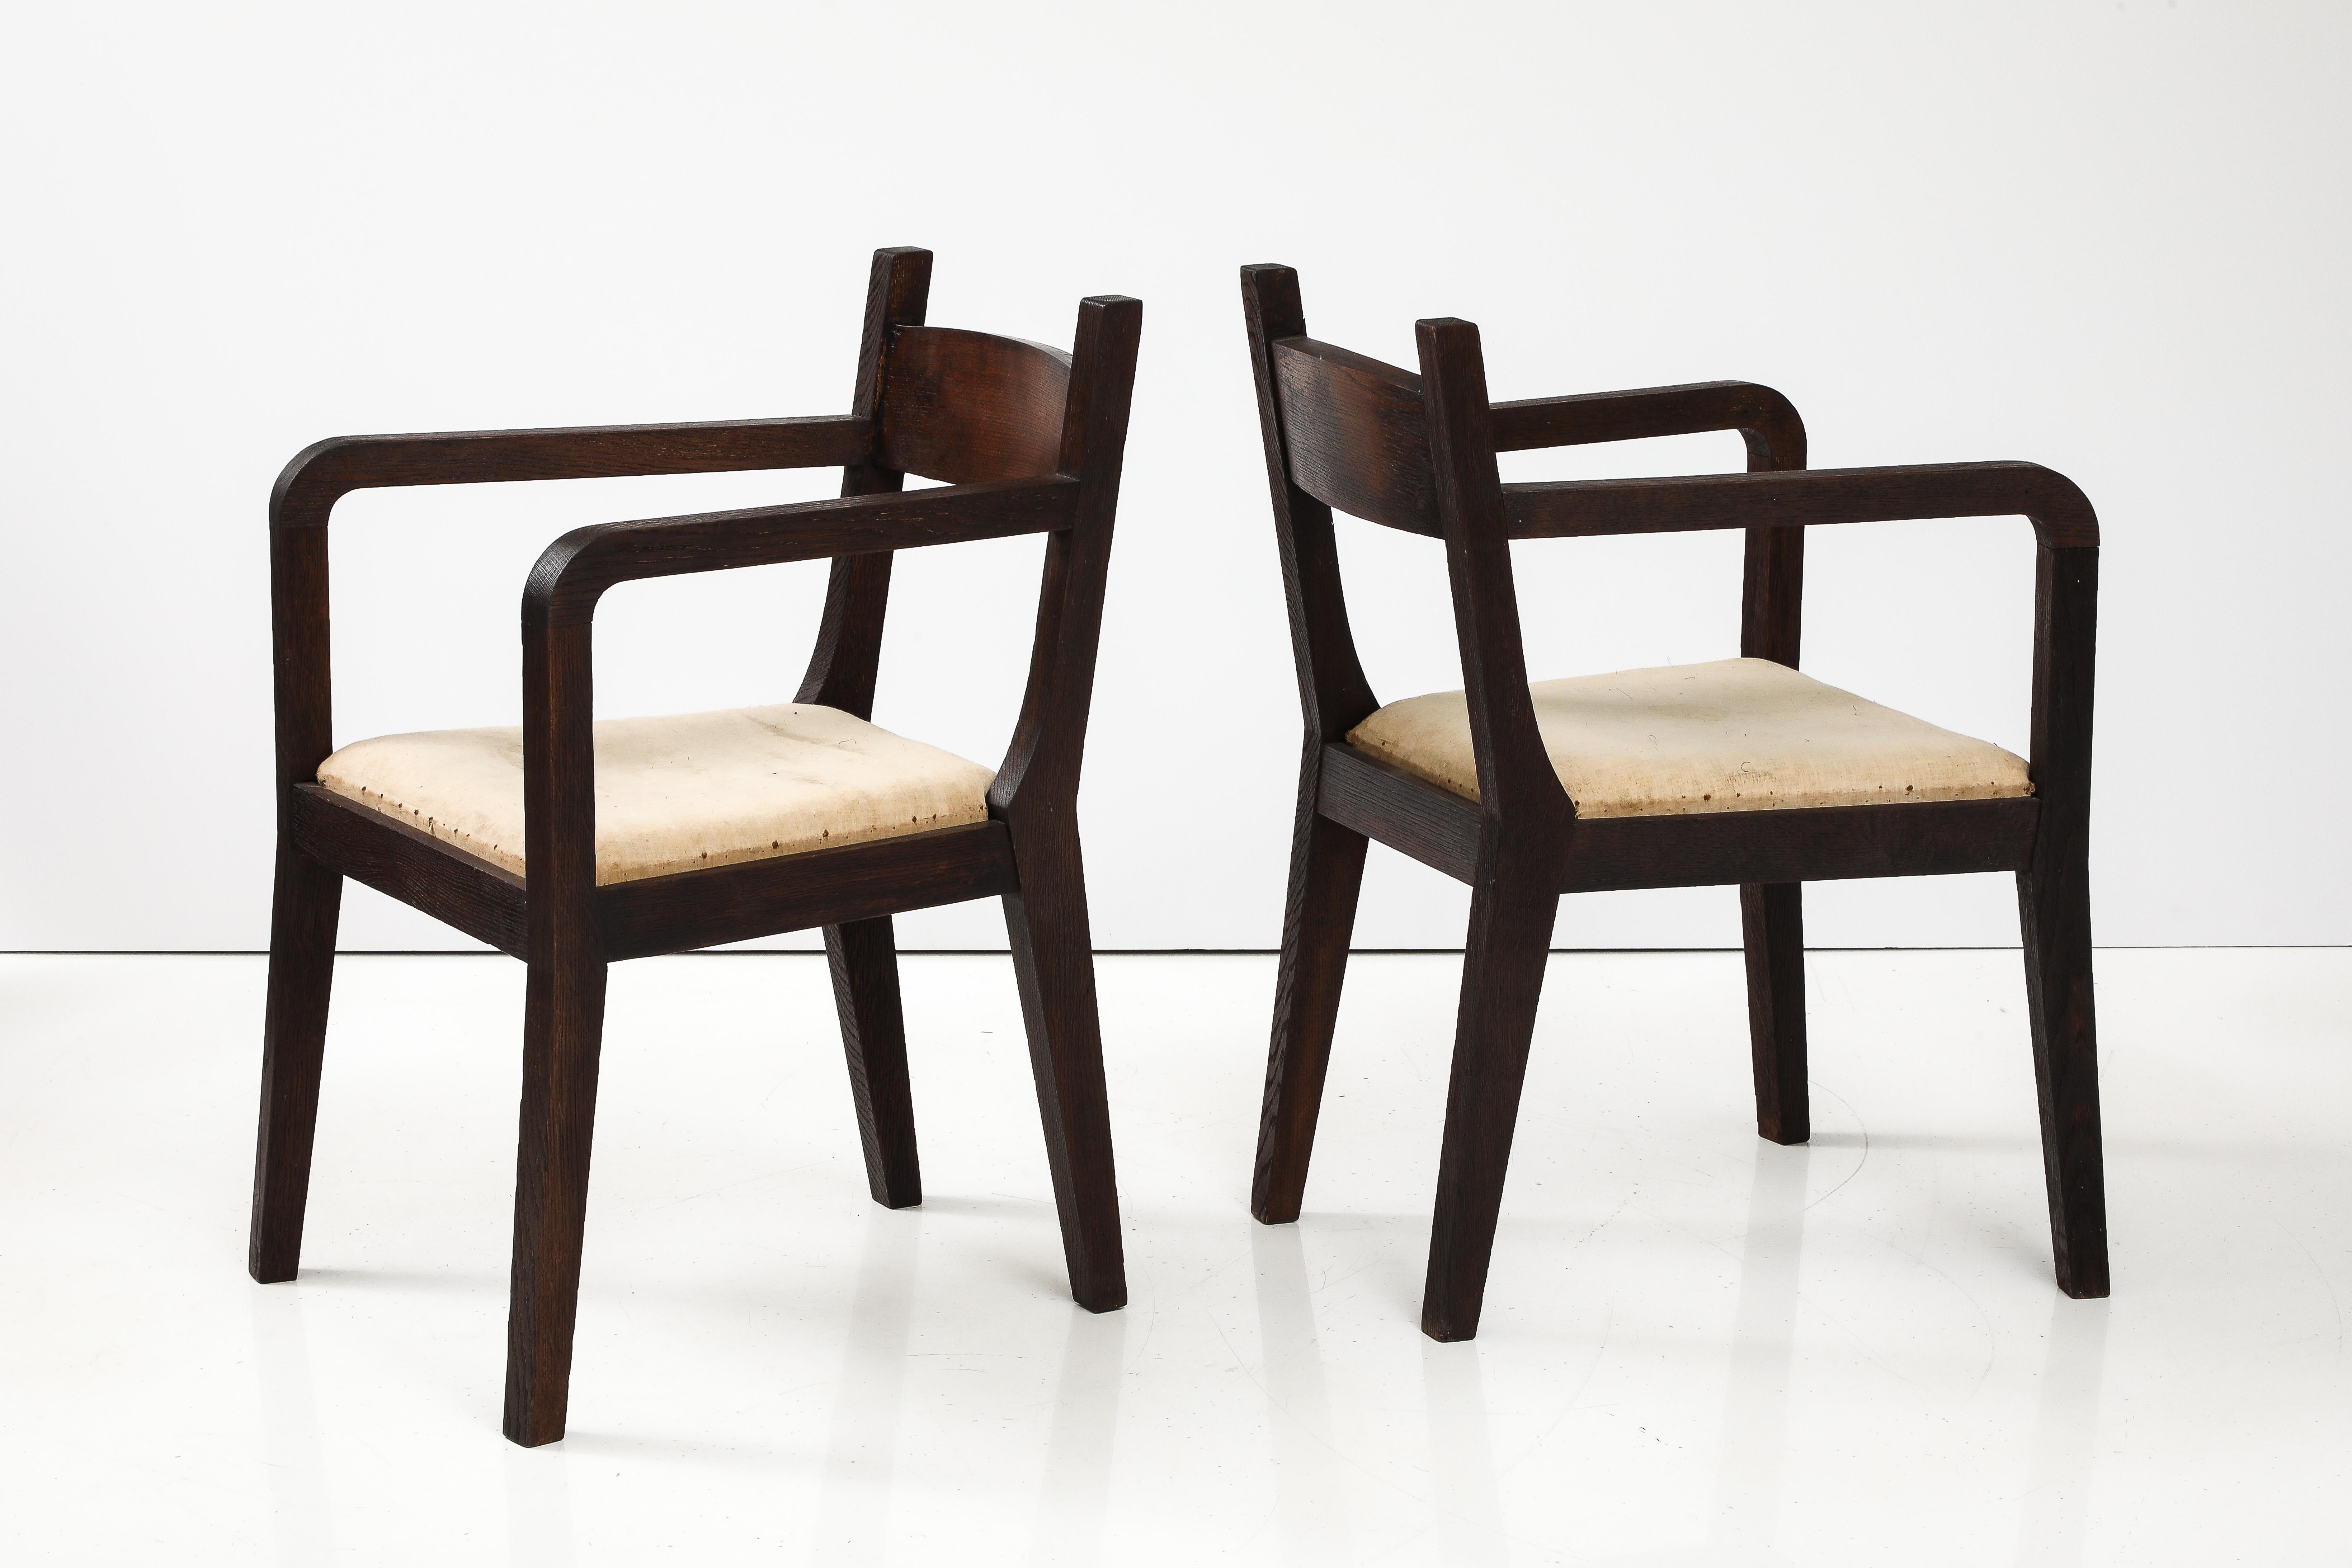 Pair of Modernist Eyre de Lanux Armchairs in Brushed Oak, France, c. 1925 For Sale 7